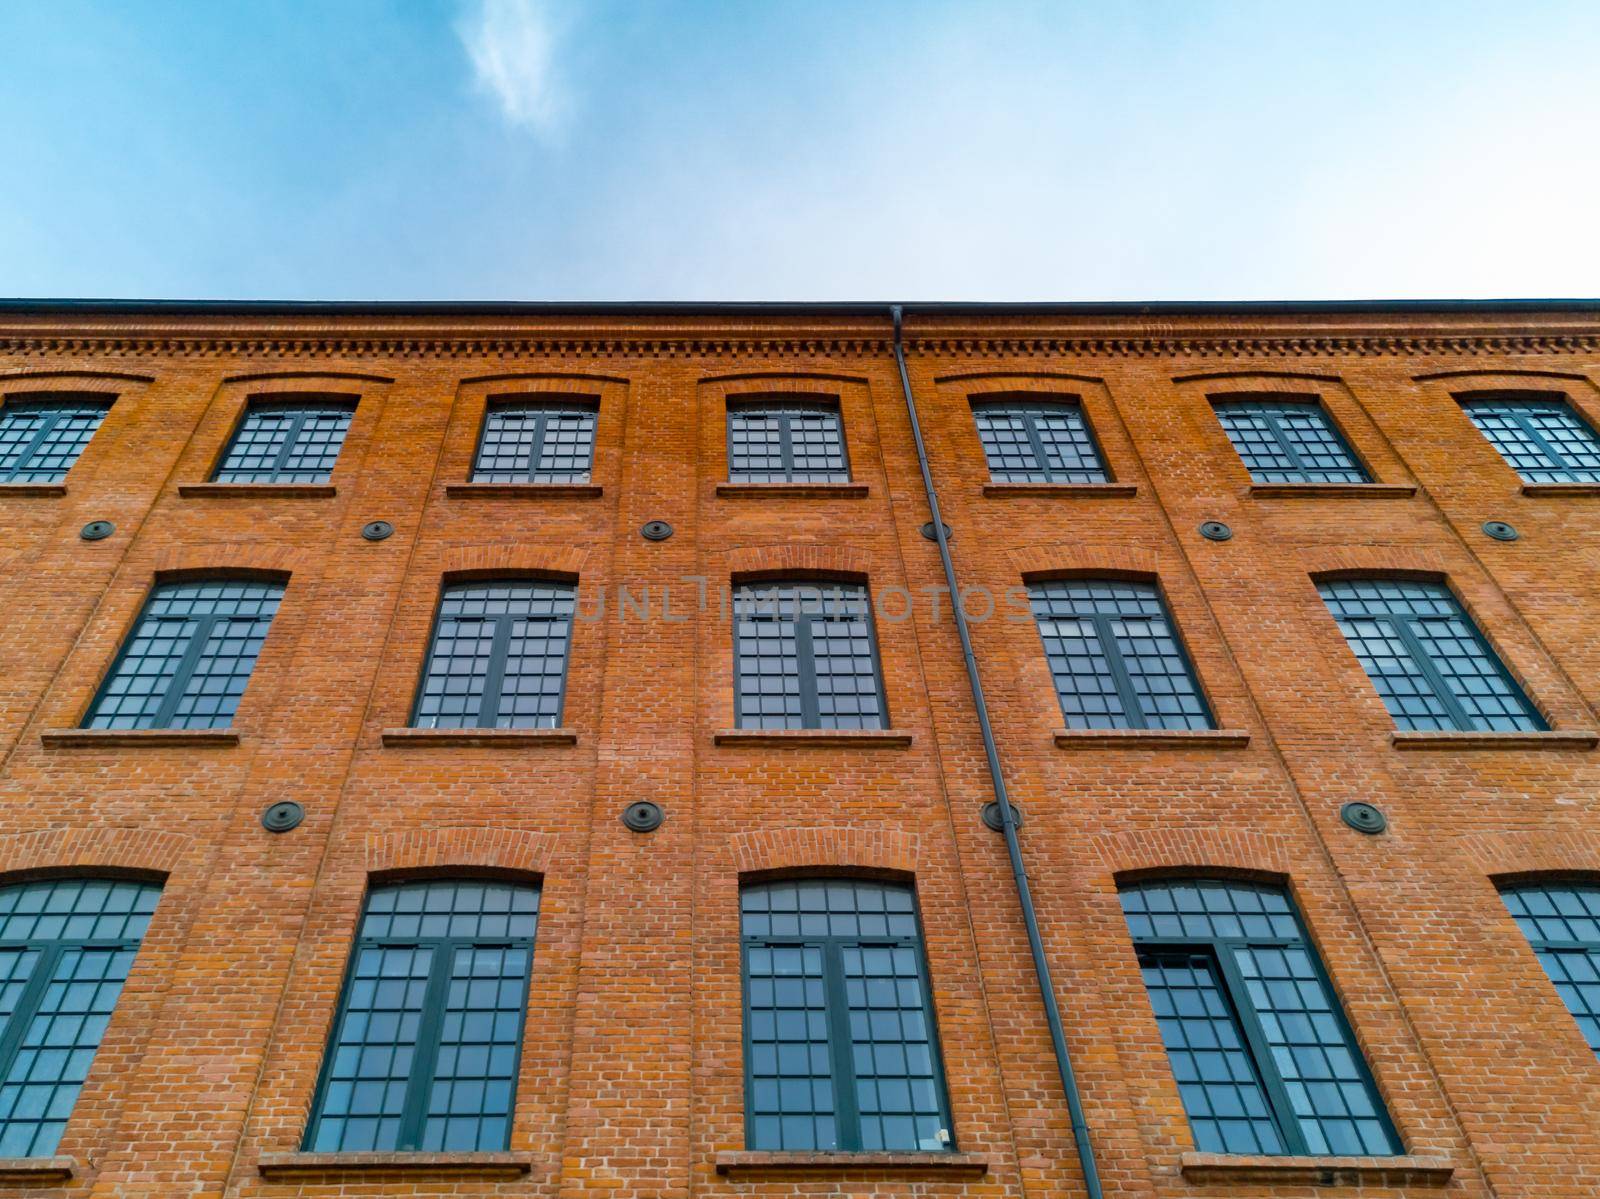 Upward view to high red brick building with a lot of windows